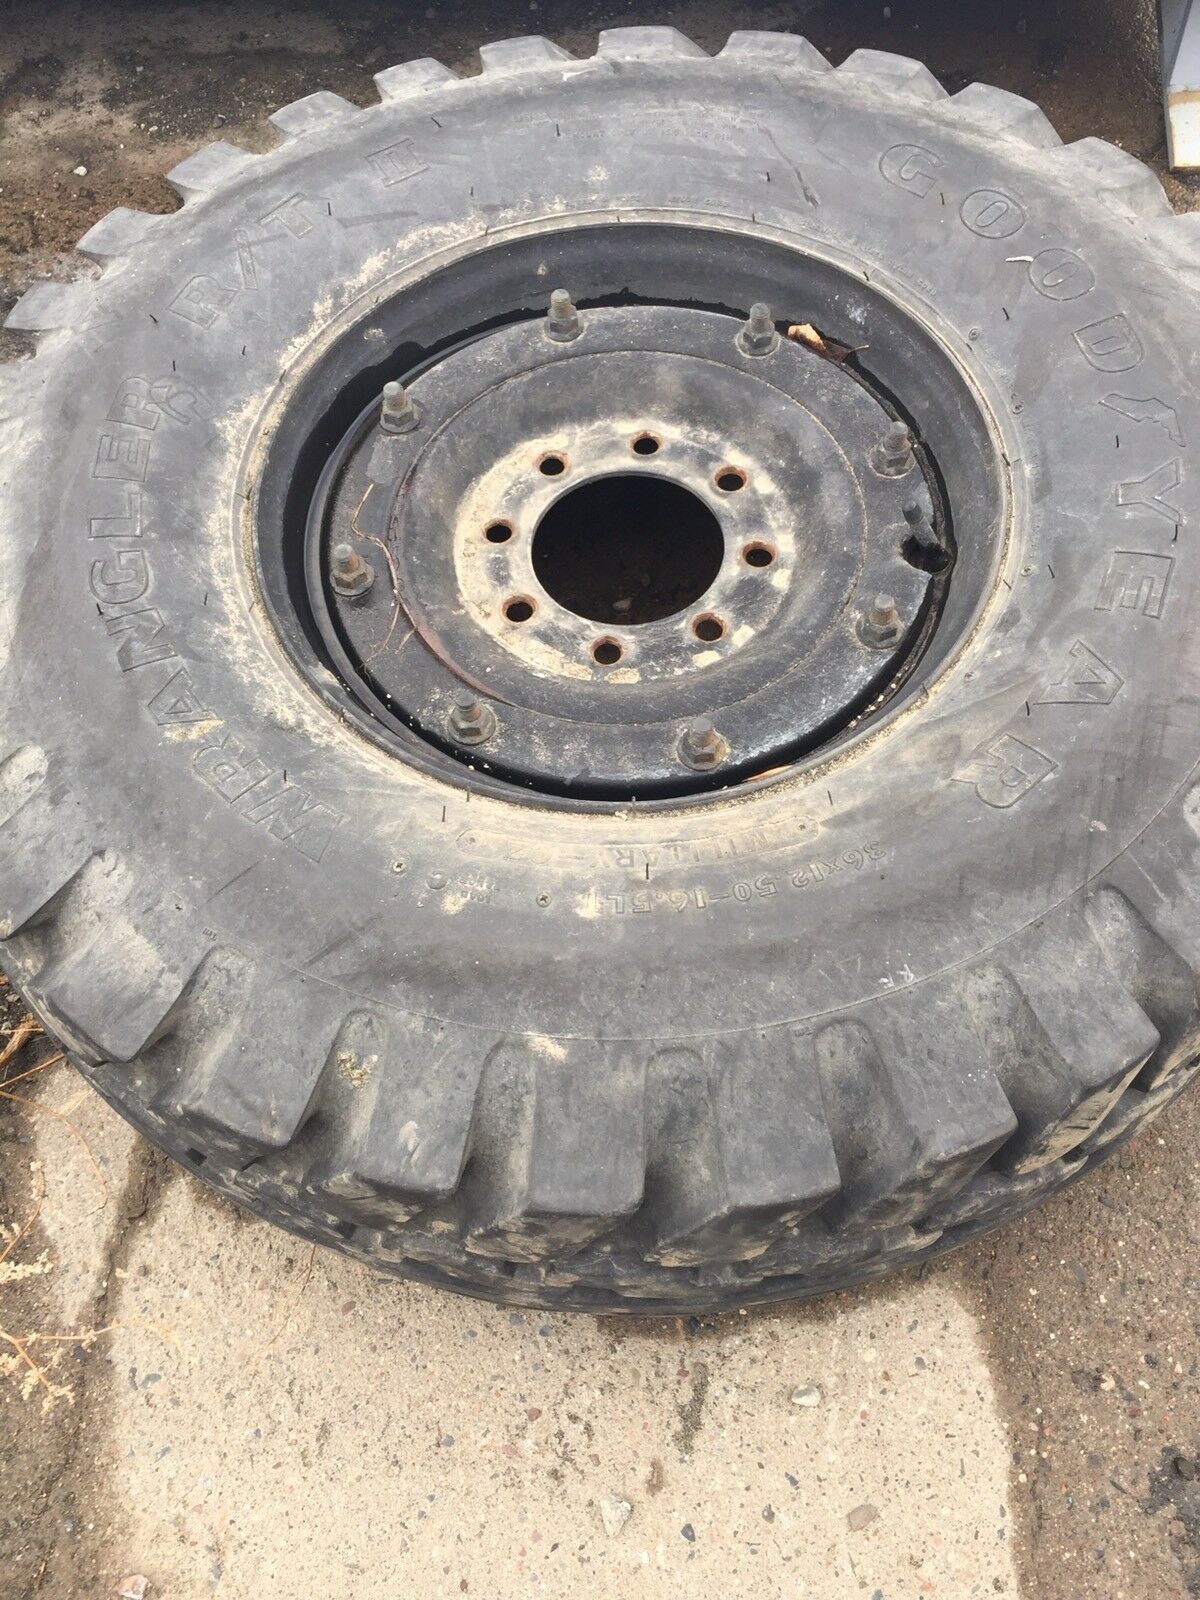 MILITARY HUMVEE SPARE TIRE WITH 8 BOLT RIM 36